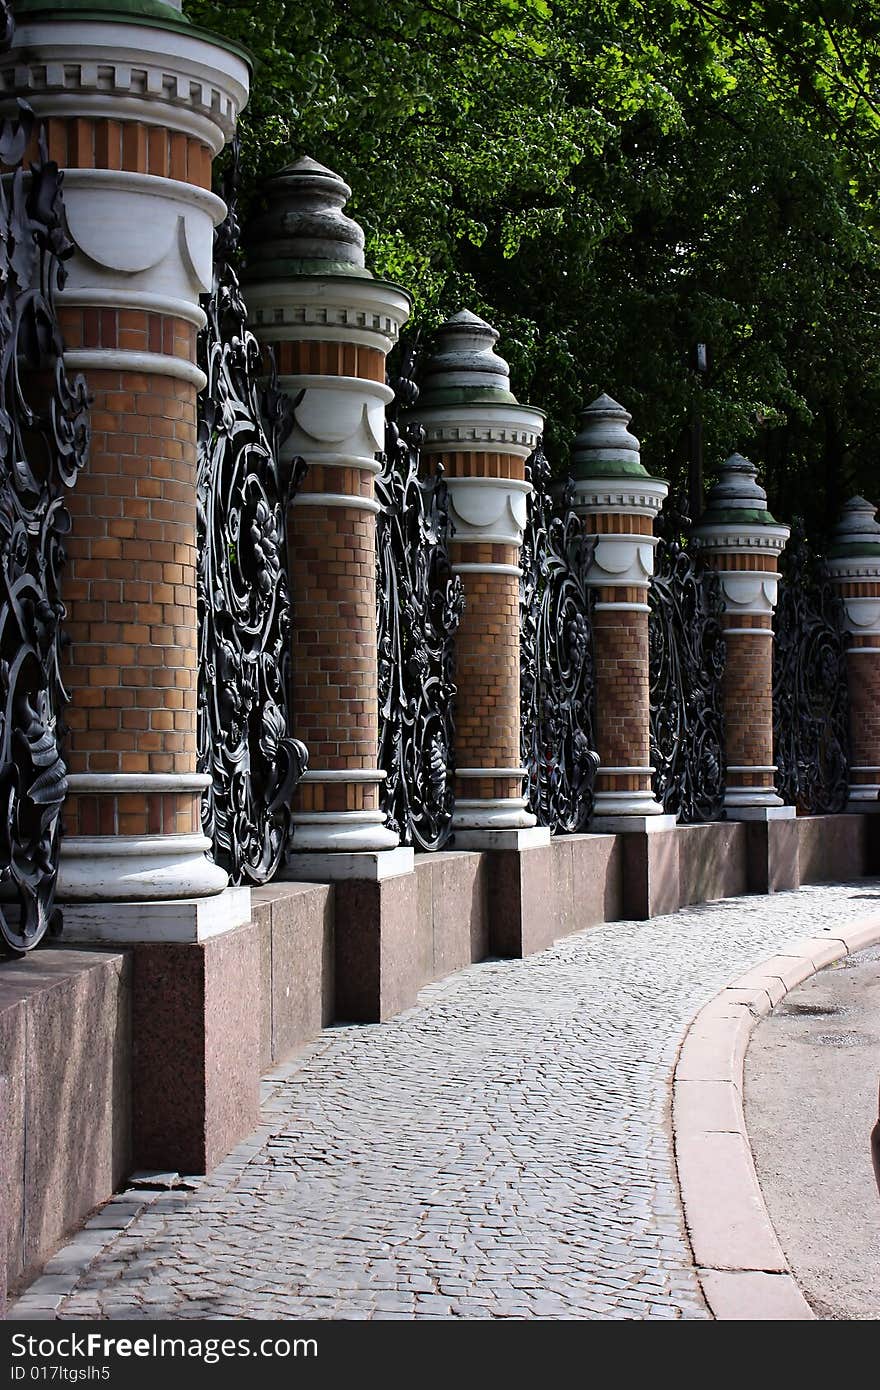 Russia. St.Petersburg. The fence of park.